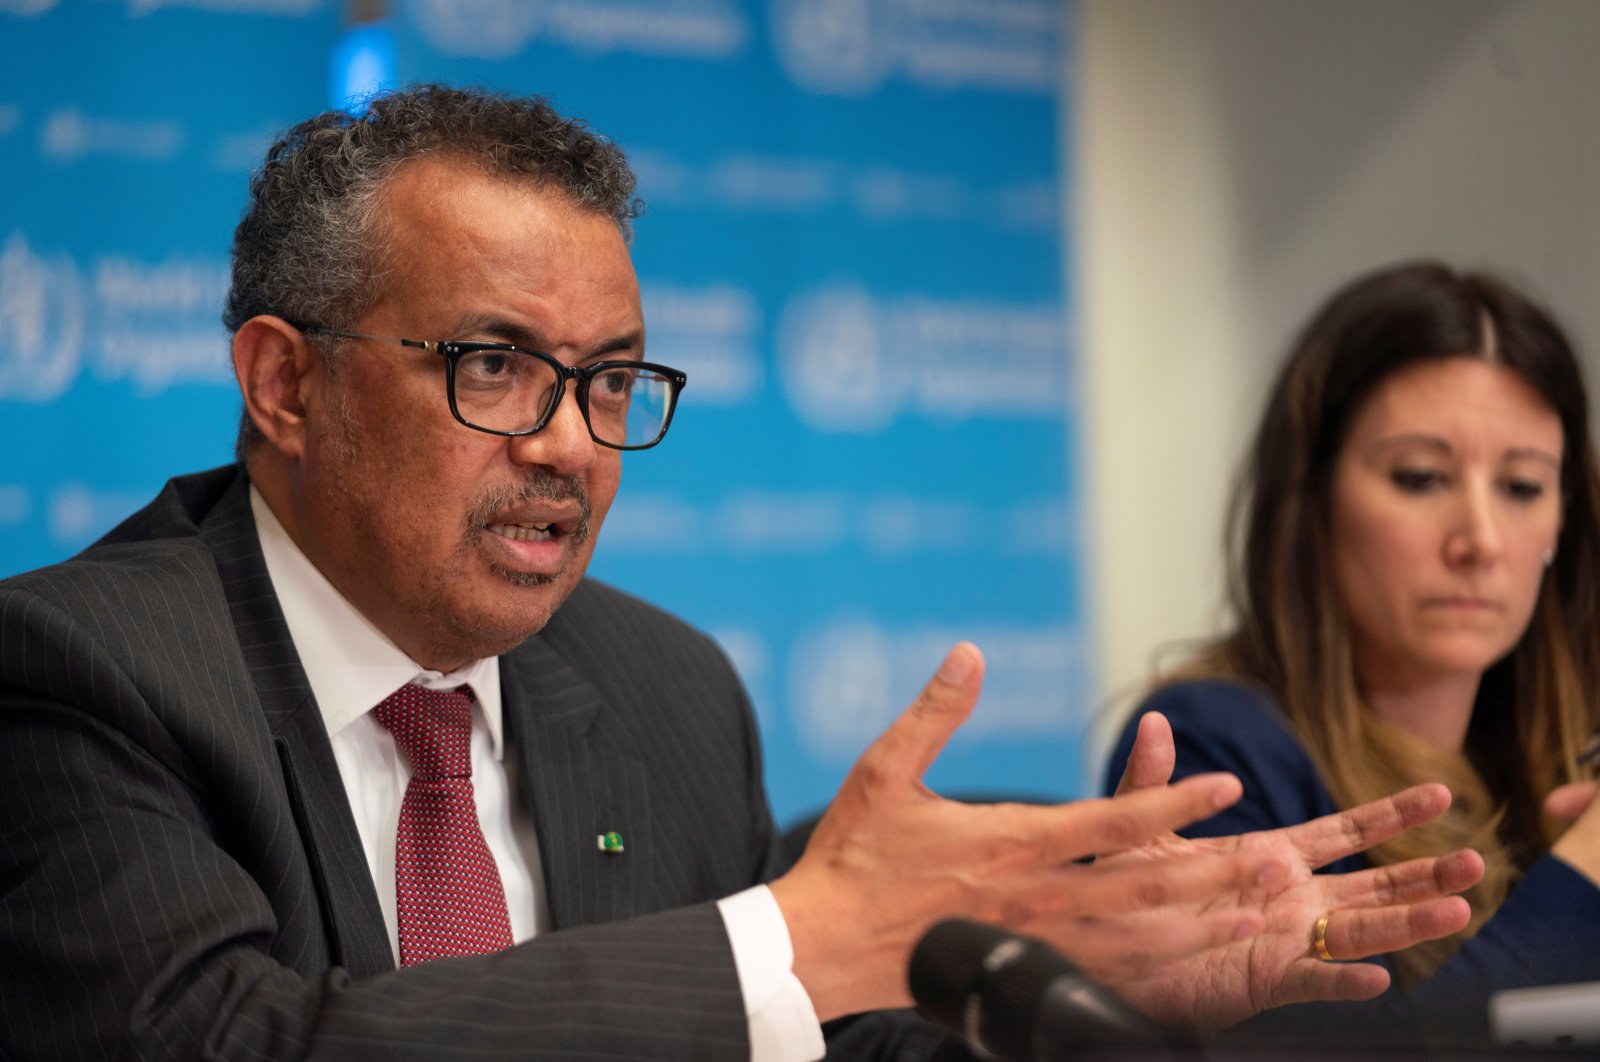 Director-General of World Health Organization (WHO) Tedros Adhanom Ghebreyesus attends a news conference on the outbreak of the coronavirus disease (COVID-19) in Geneva, Switzerland, March 16, 2020. (Reuters Photo)